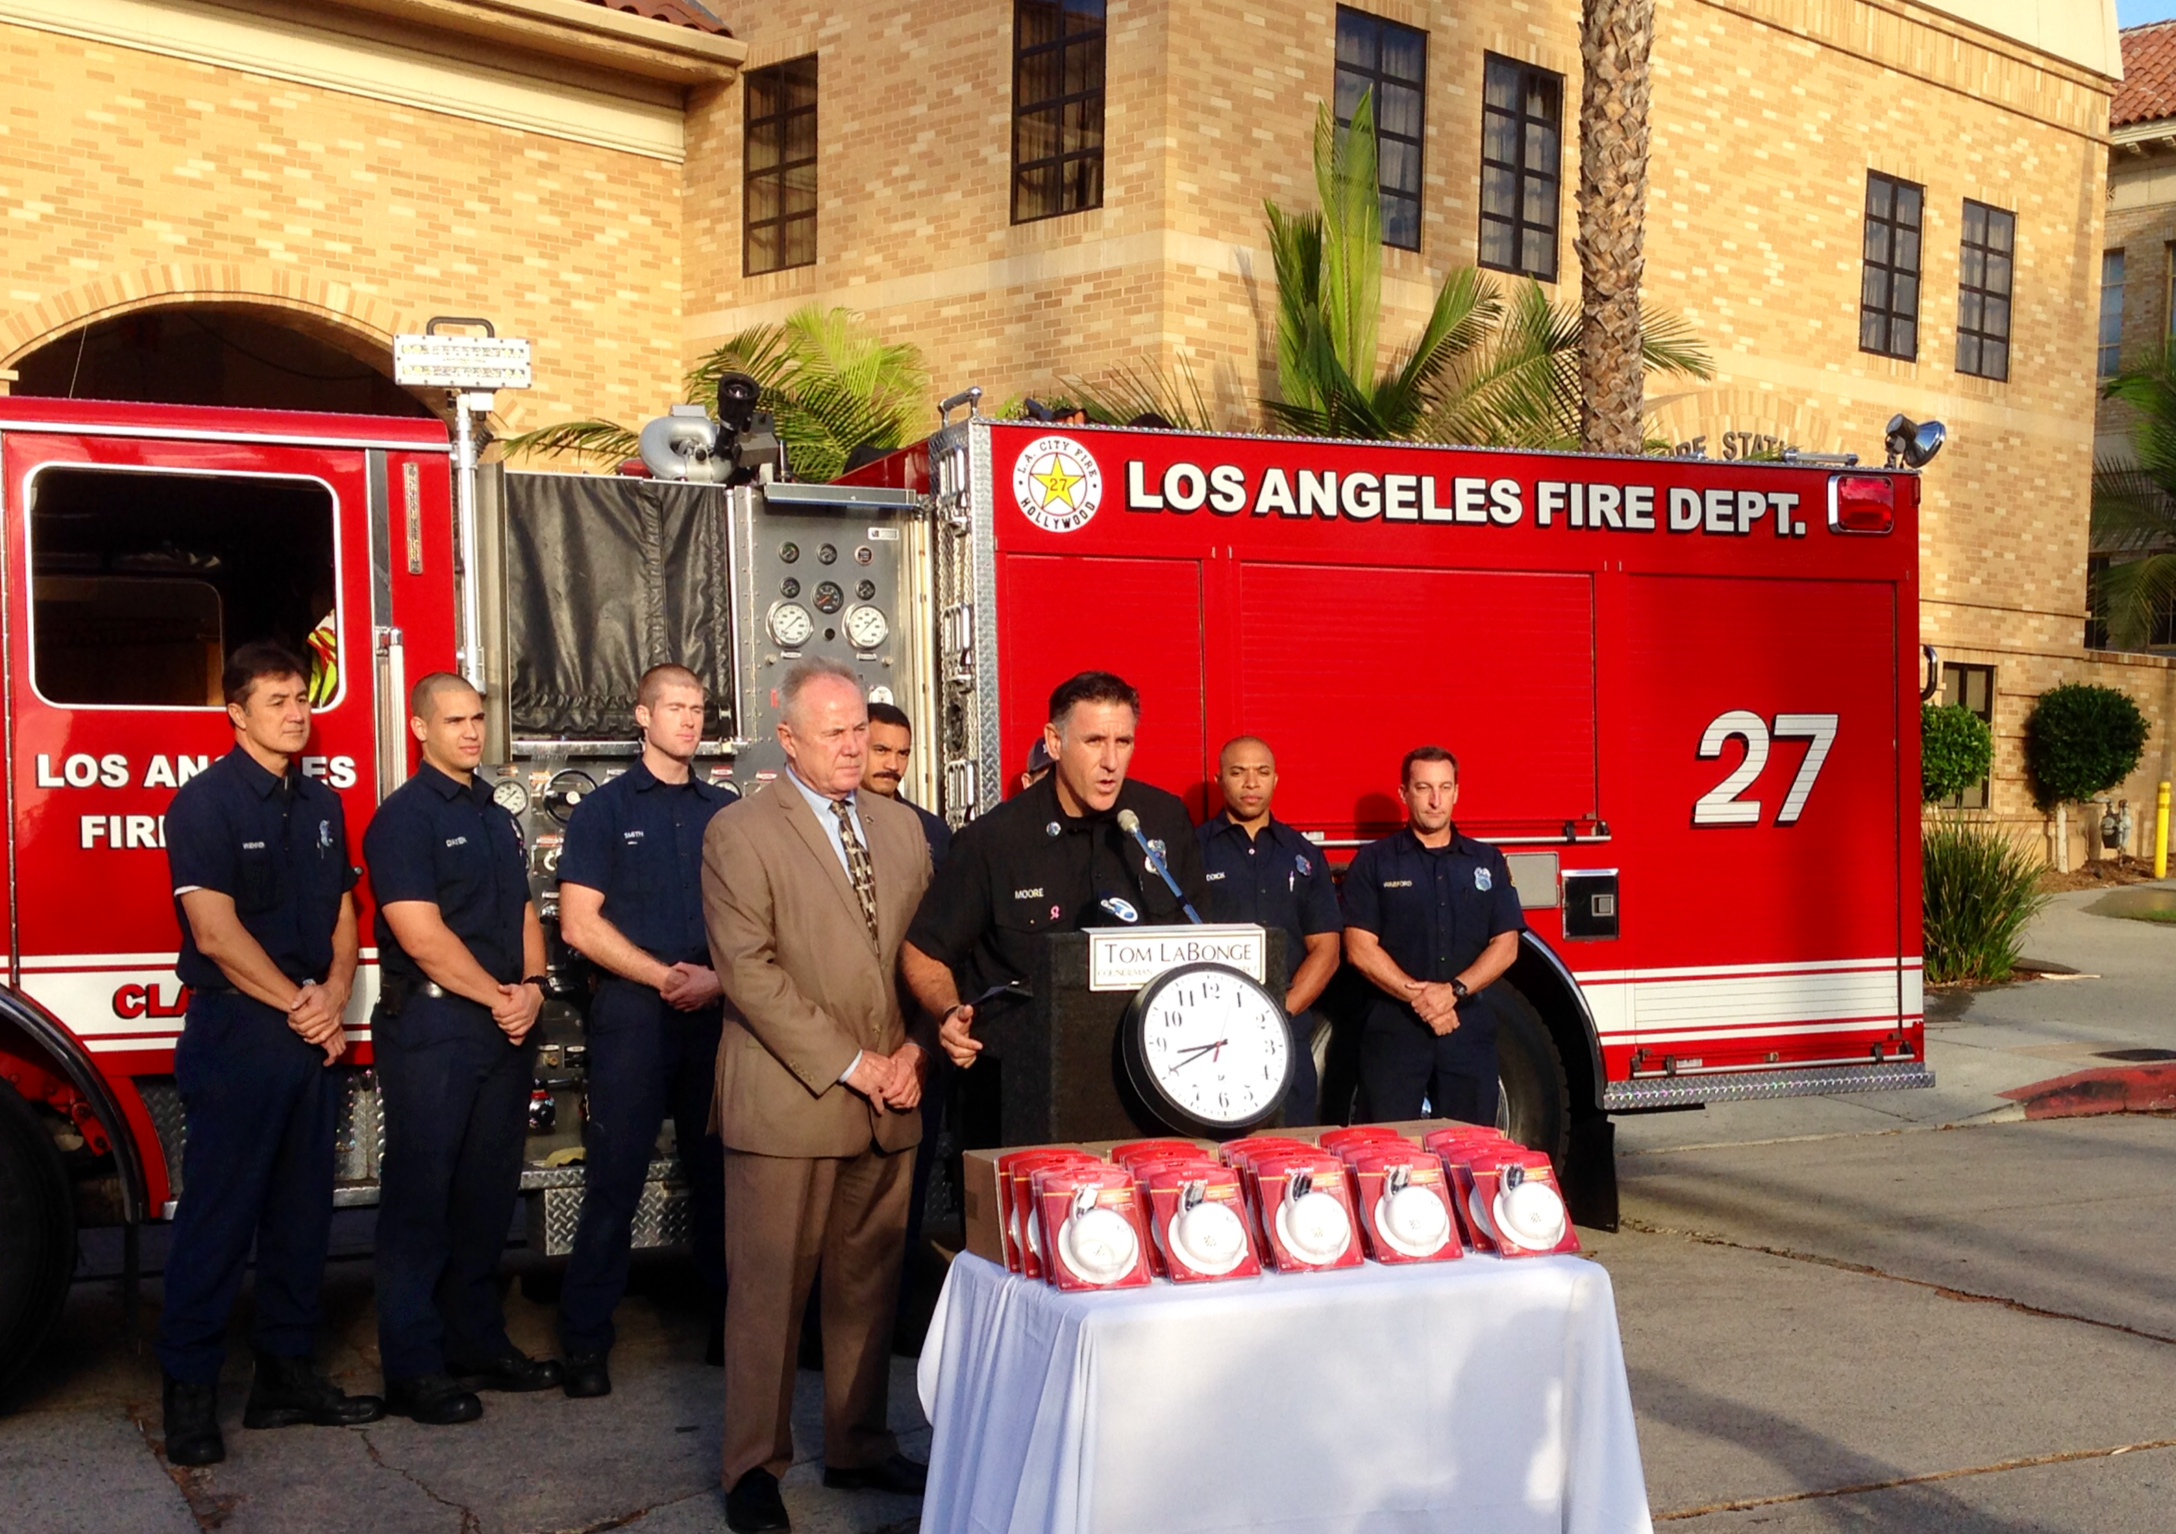 LAFD Captain Moore speaking at lectern. Firefighters and a fire engine in the background and a table of smoke alarms in the foreground.